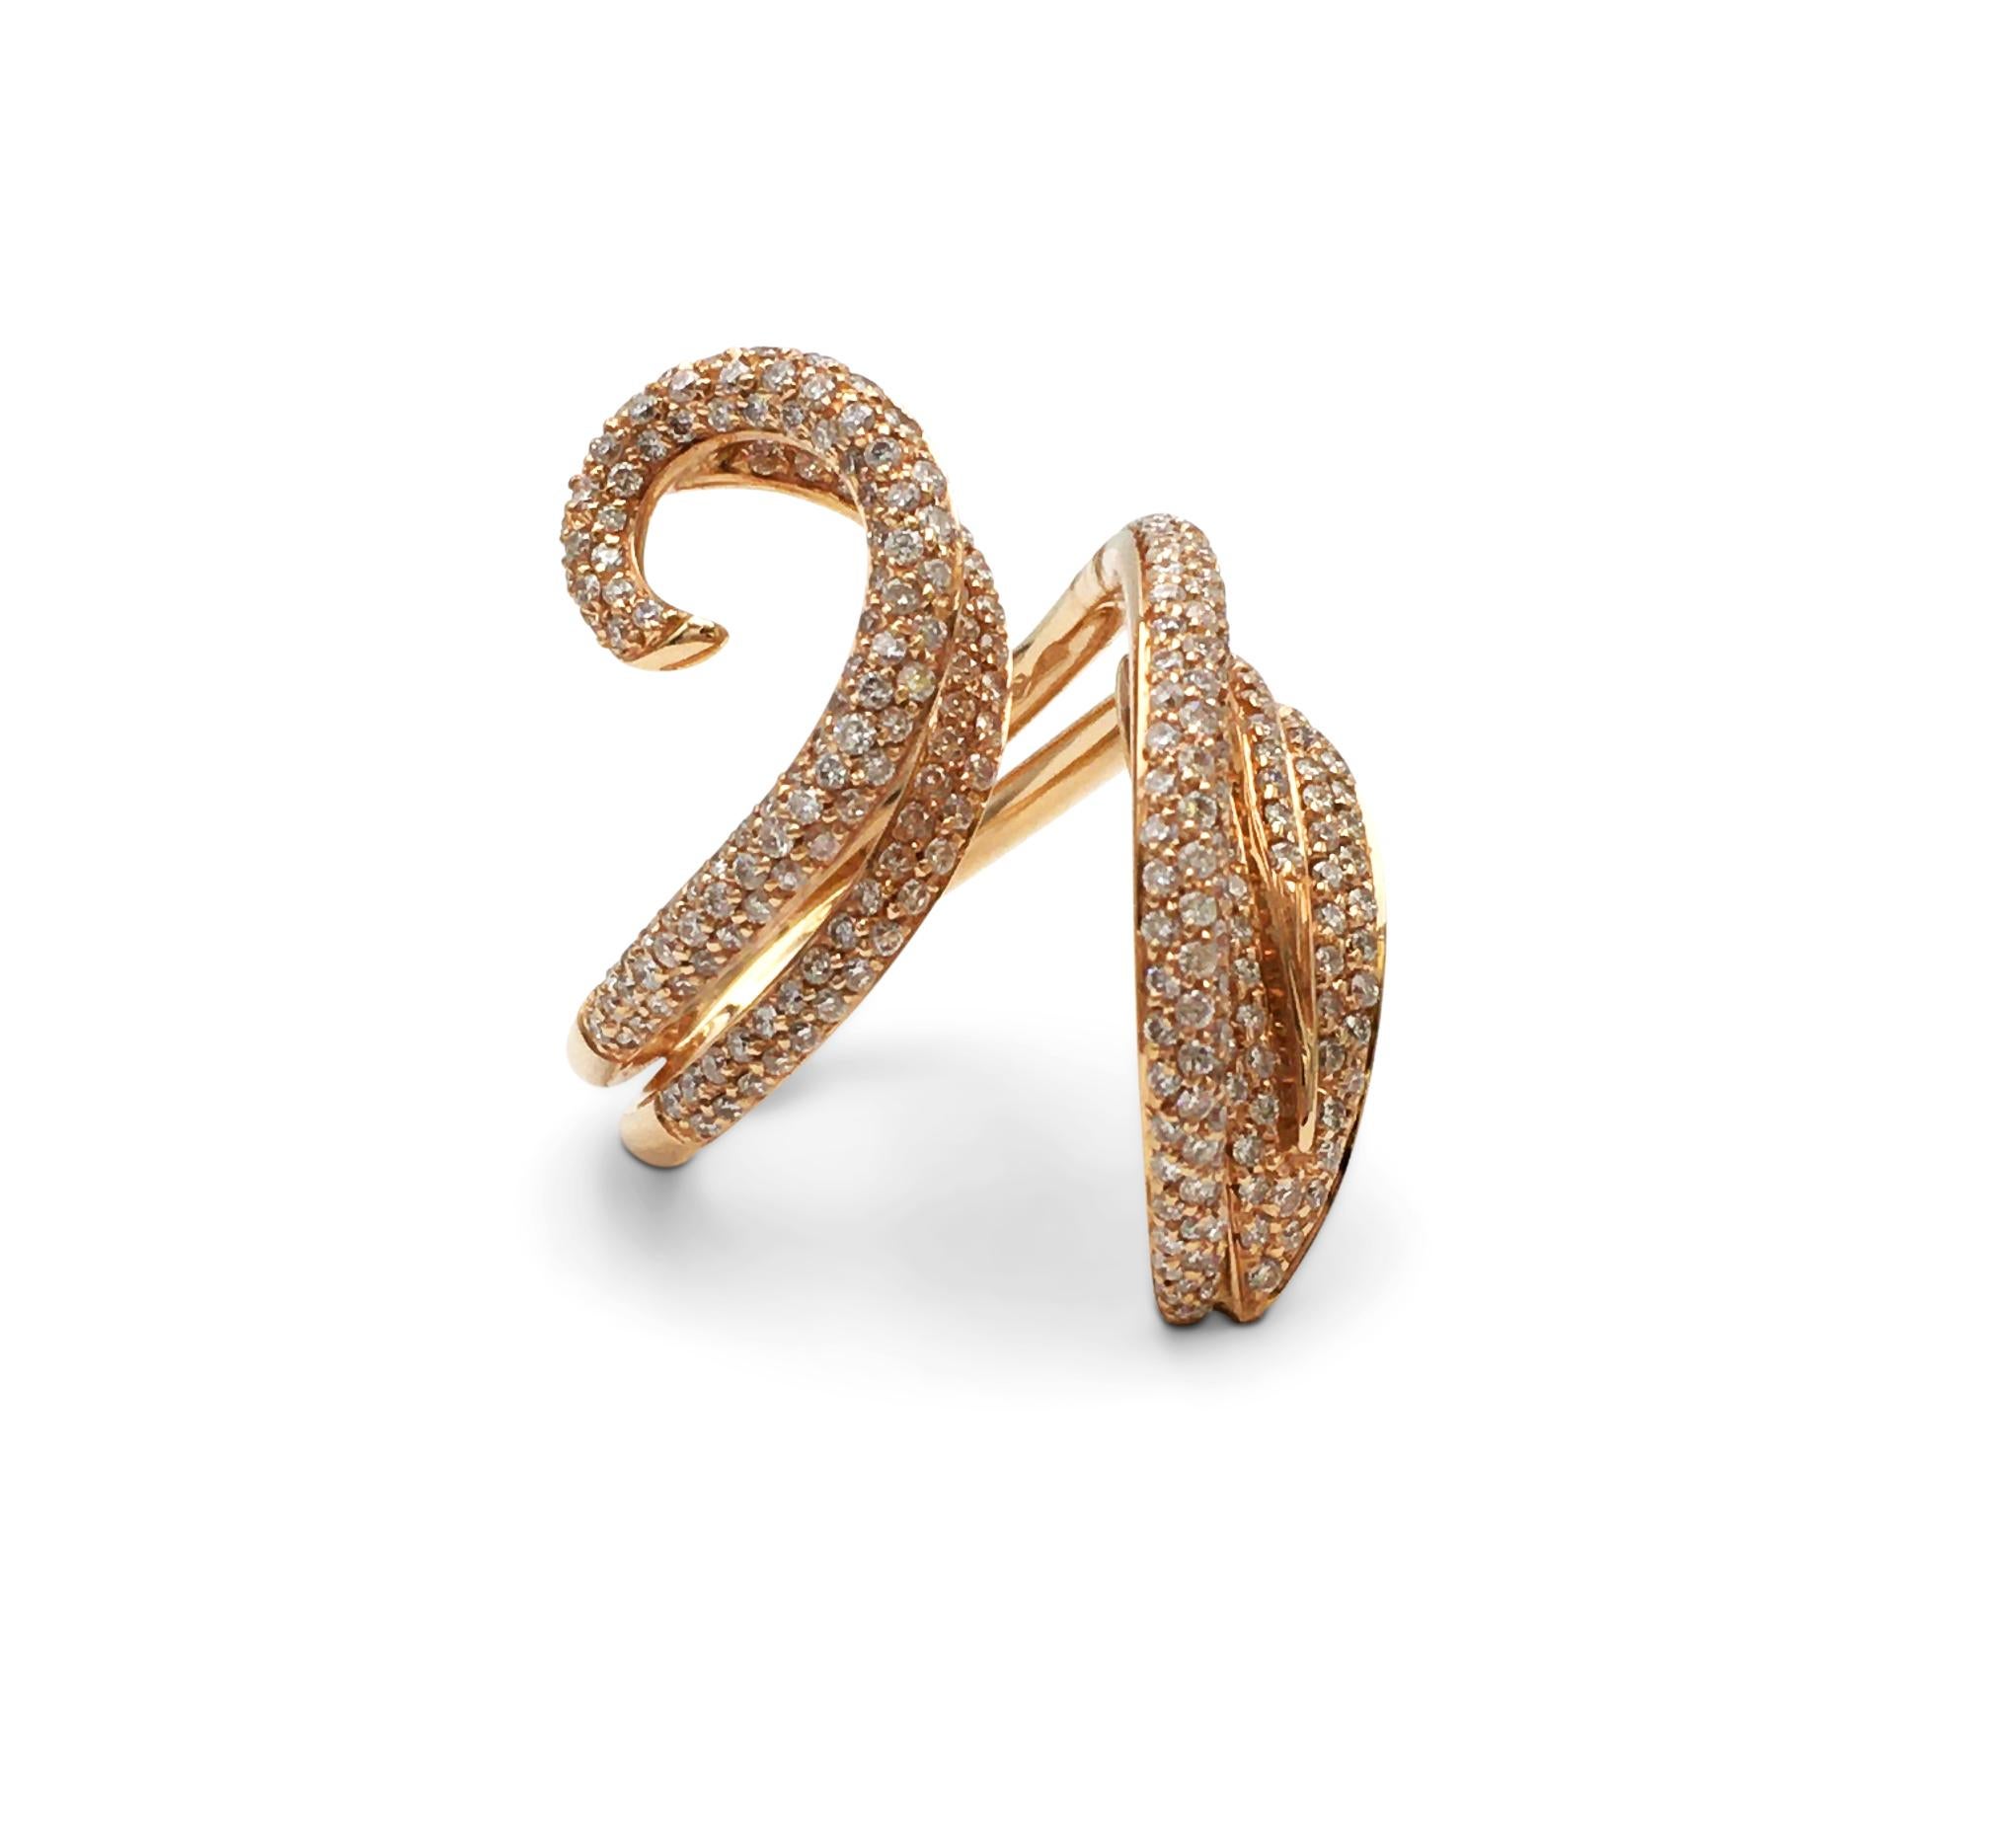 This Giovanni Ferraris crafted in 18 karat rose gold twists elegantly around the finger and set with an estimated 1.50 carats of round brilliant cut diamonds. The ring is not presented with the original box or papers. Signed Gioanni Ferrarus, 750,